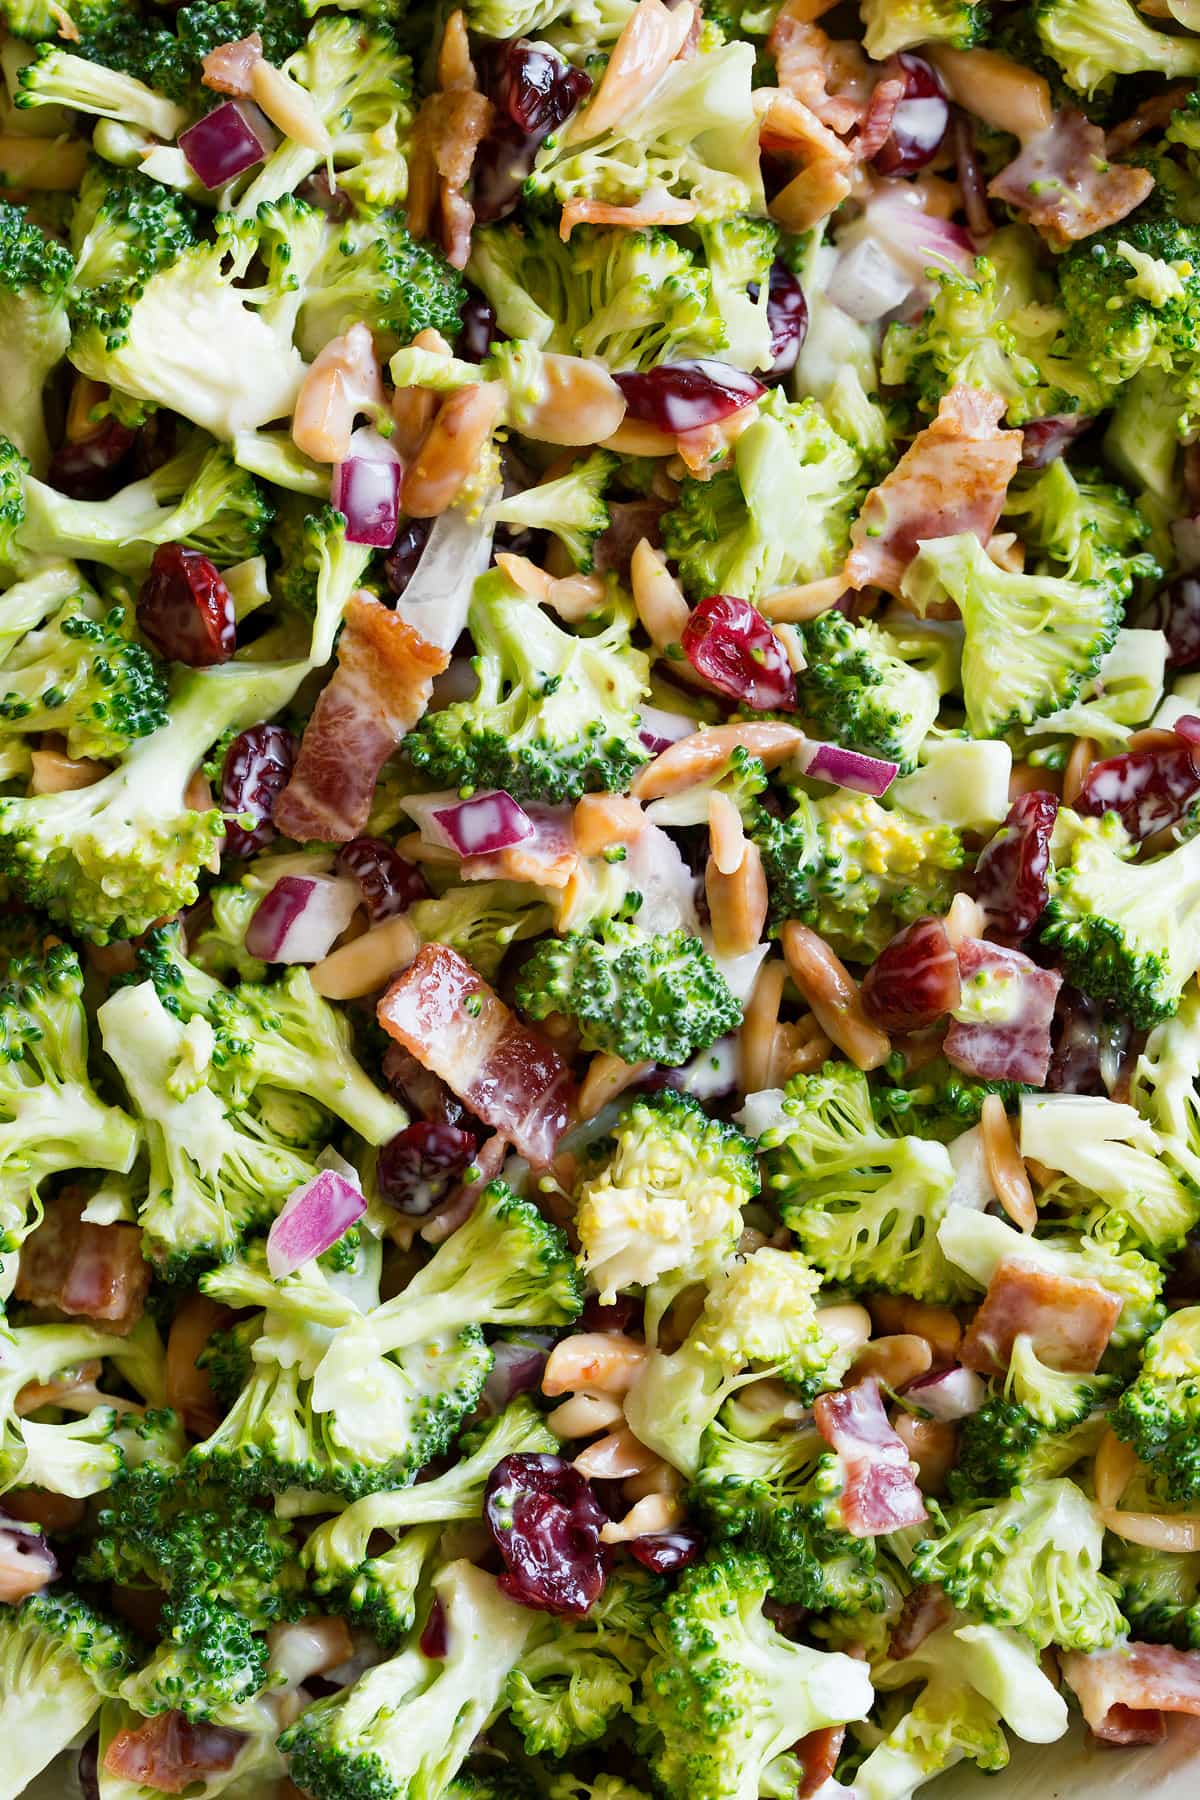 Broccoli salad close up showing ingredients